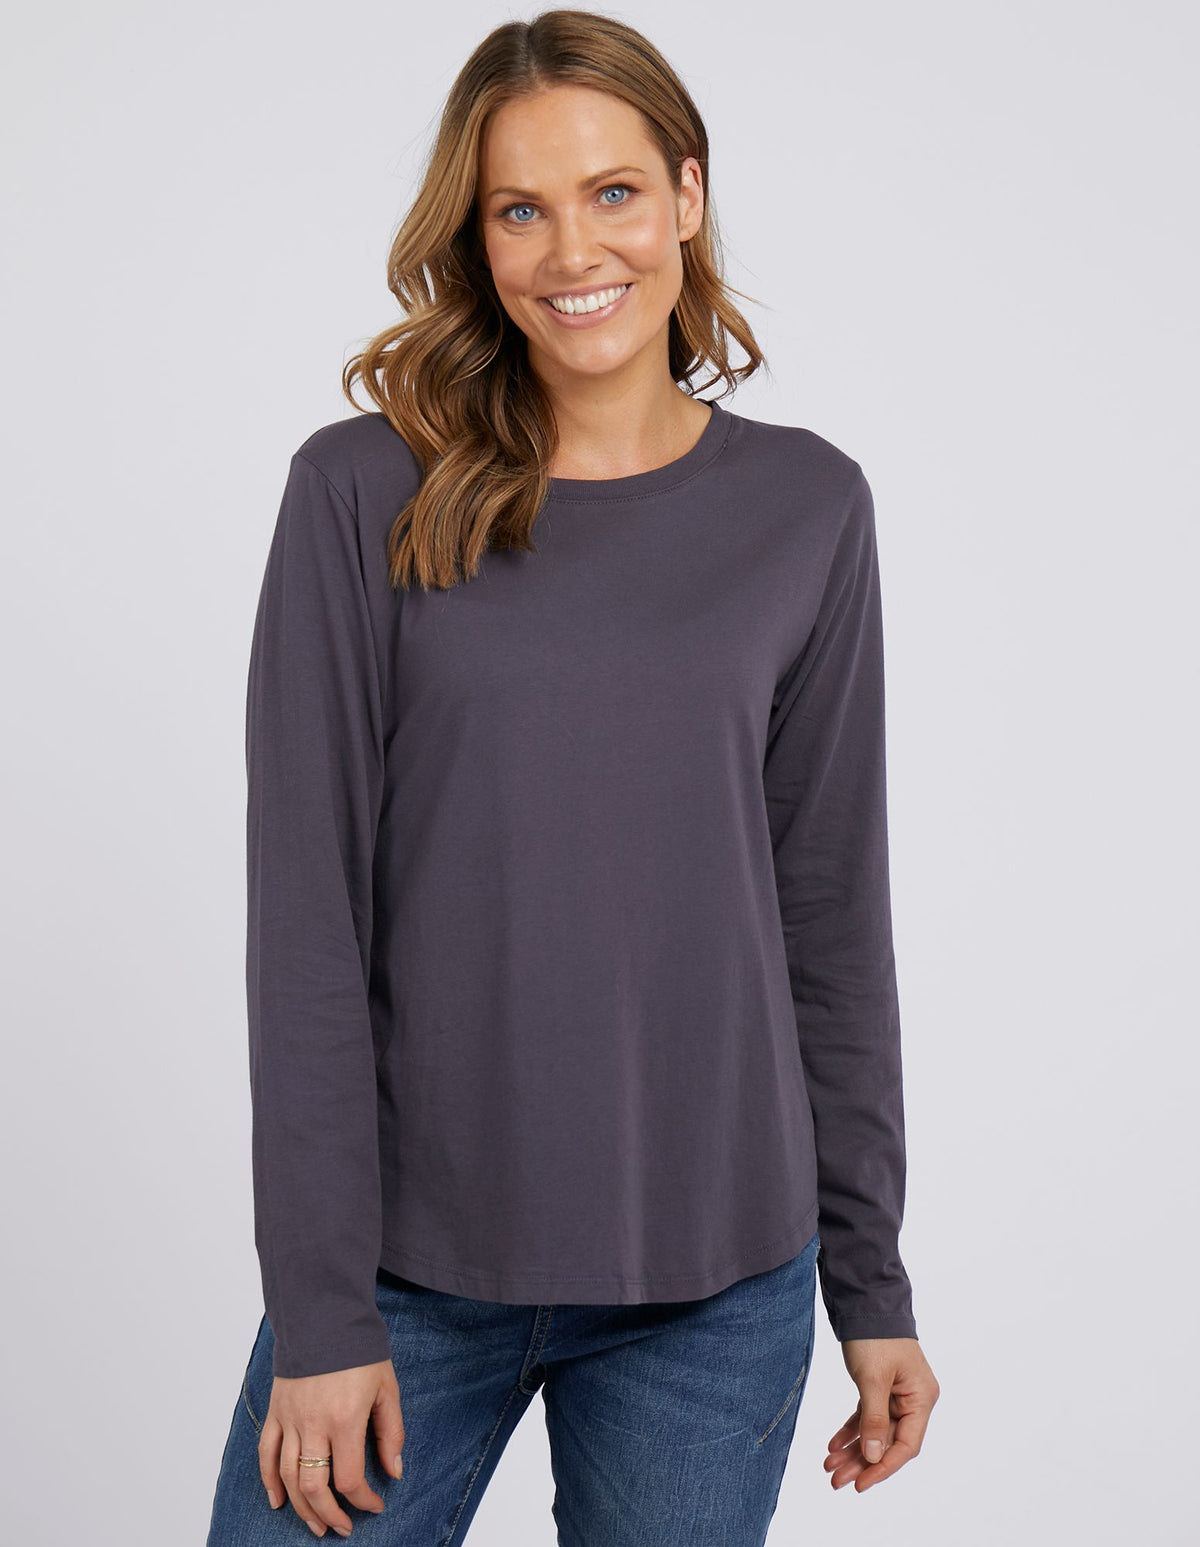 Manly Long Sleeve Tee - Coal - Foxwood - FUDGE Gifts Home Lifestyle